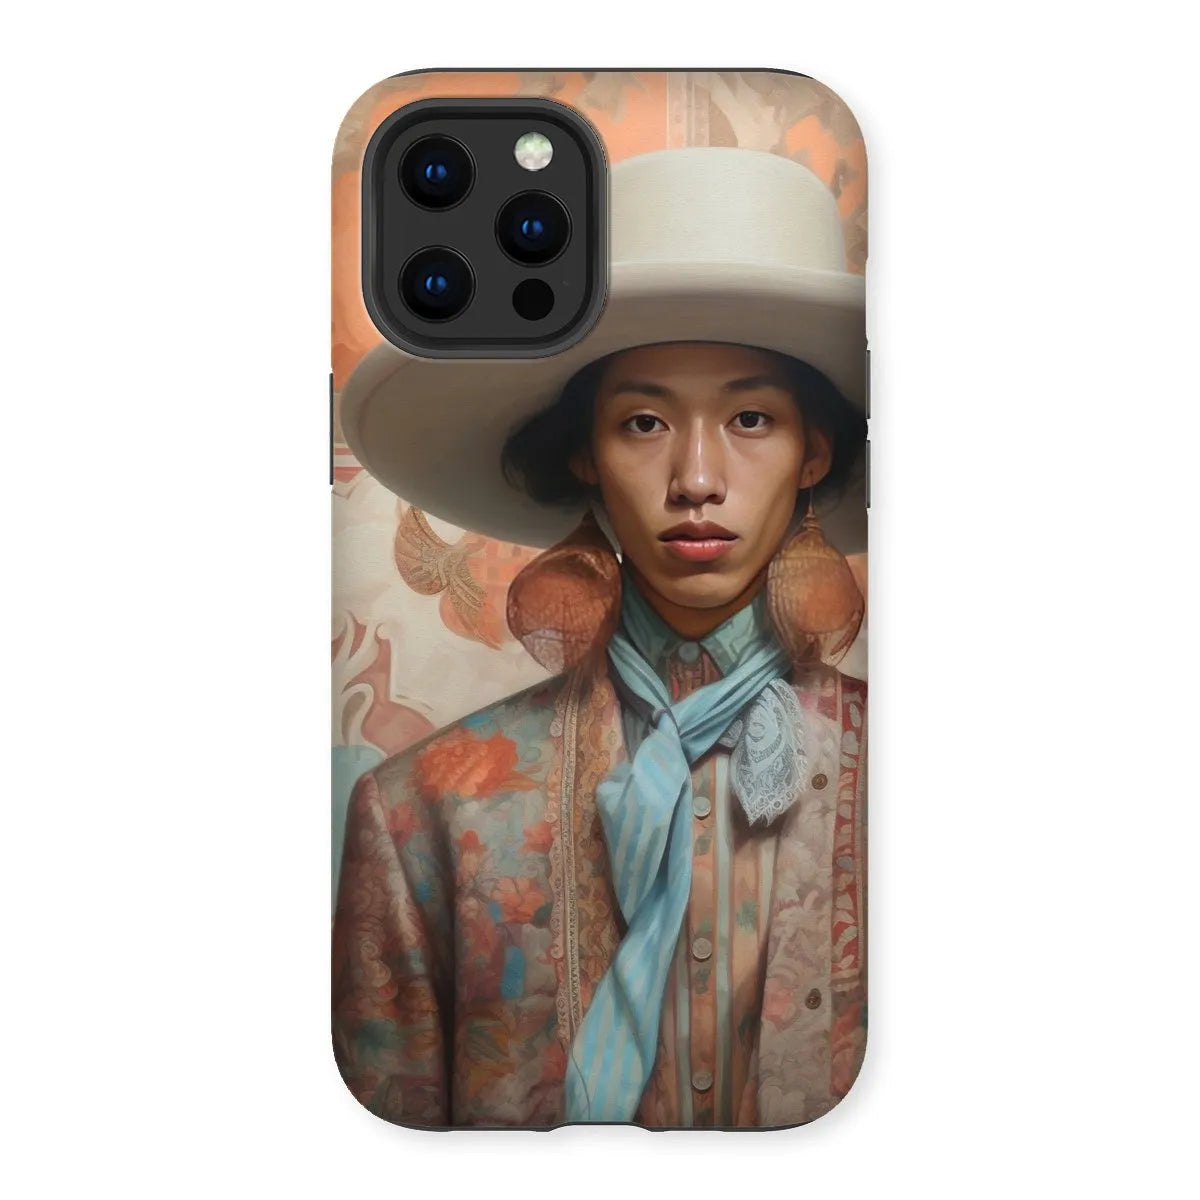 Iyaan The Gay Cowboy - Dandy Gay Aesthetic Art Phone Case - Iphone 12 Pro Max / Matte - Mobile Phone Cases - Aesthetic